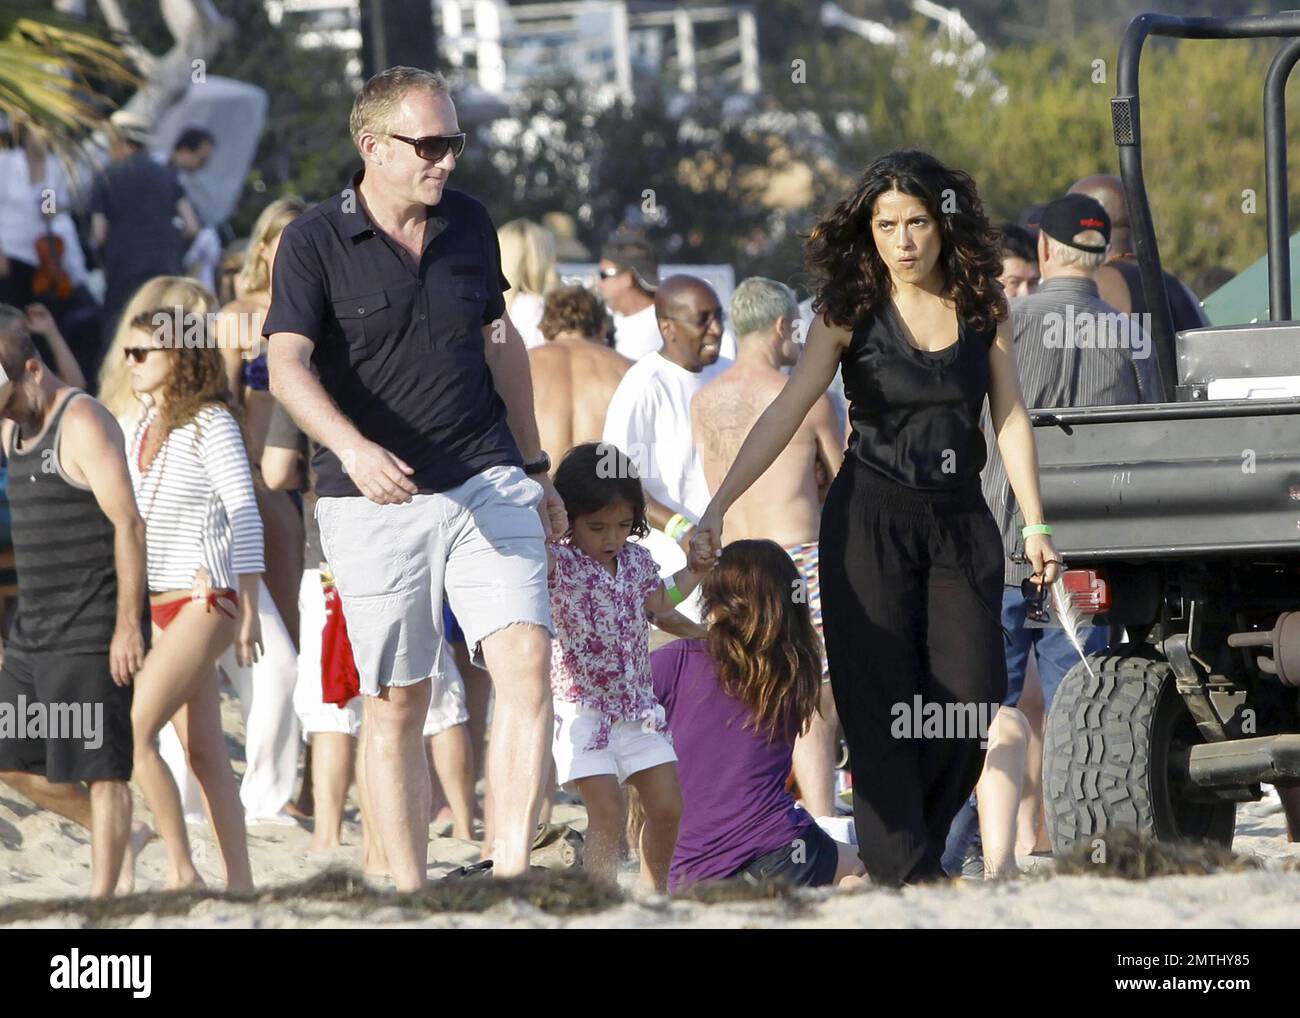 EXCLUSIVE!! Actress Salma Hayek, husband Francois-Henri Pinault and  daughter Valentina end their Fourth of July holiday with a family walk on  the beach. Malibu, CA. 7/4/11 Stock Photo - Alamy